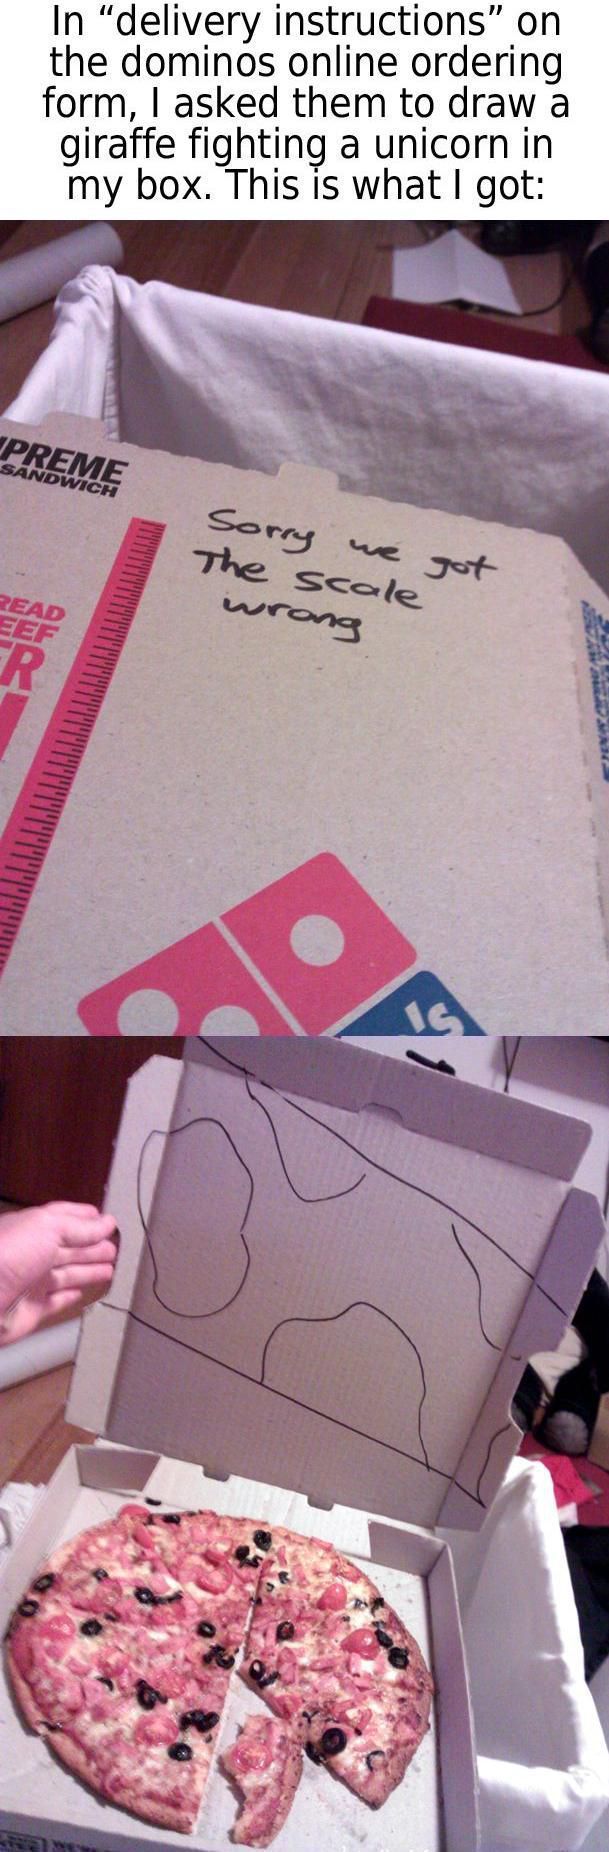 pizza box giraffe - In "delivery instructions" on the dominos online ordering form, I asked them to draw a giraffe fighting a unicorn in my box. This is what I got Preme Sandwich Sorry we The scale wrong got Read Eee